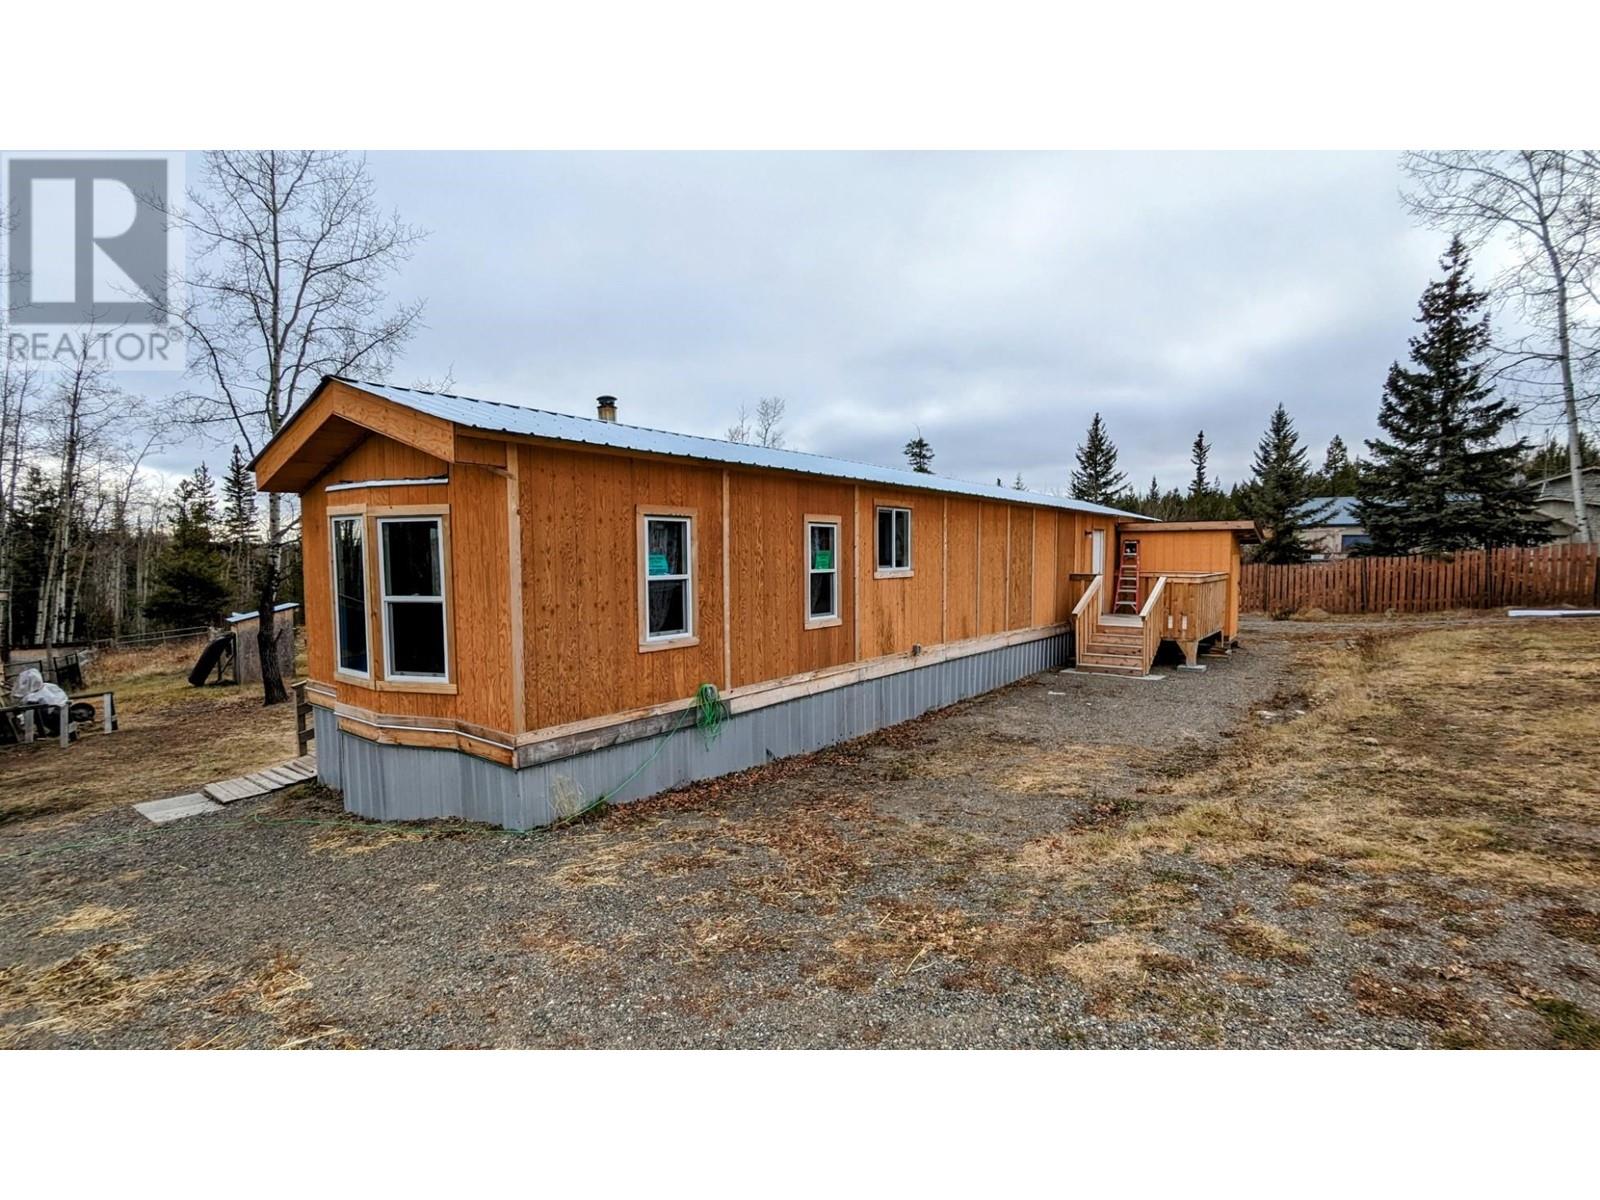 6797 CAMPBELL ROAD, 100 mile house, British Columbia